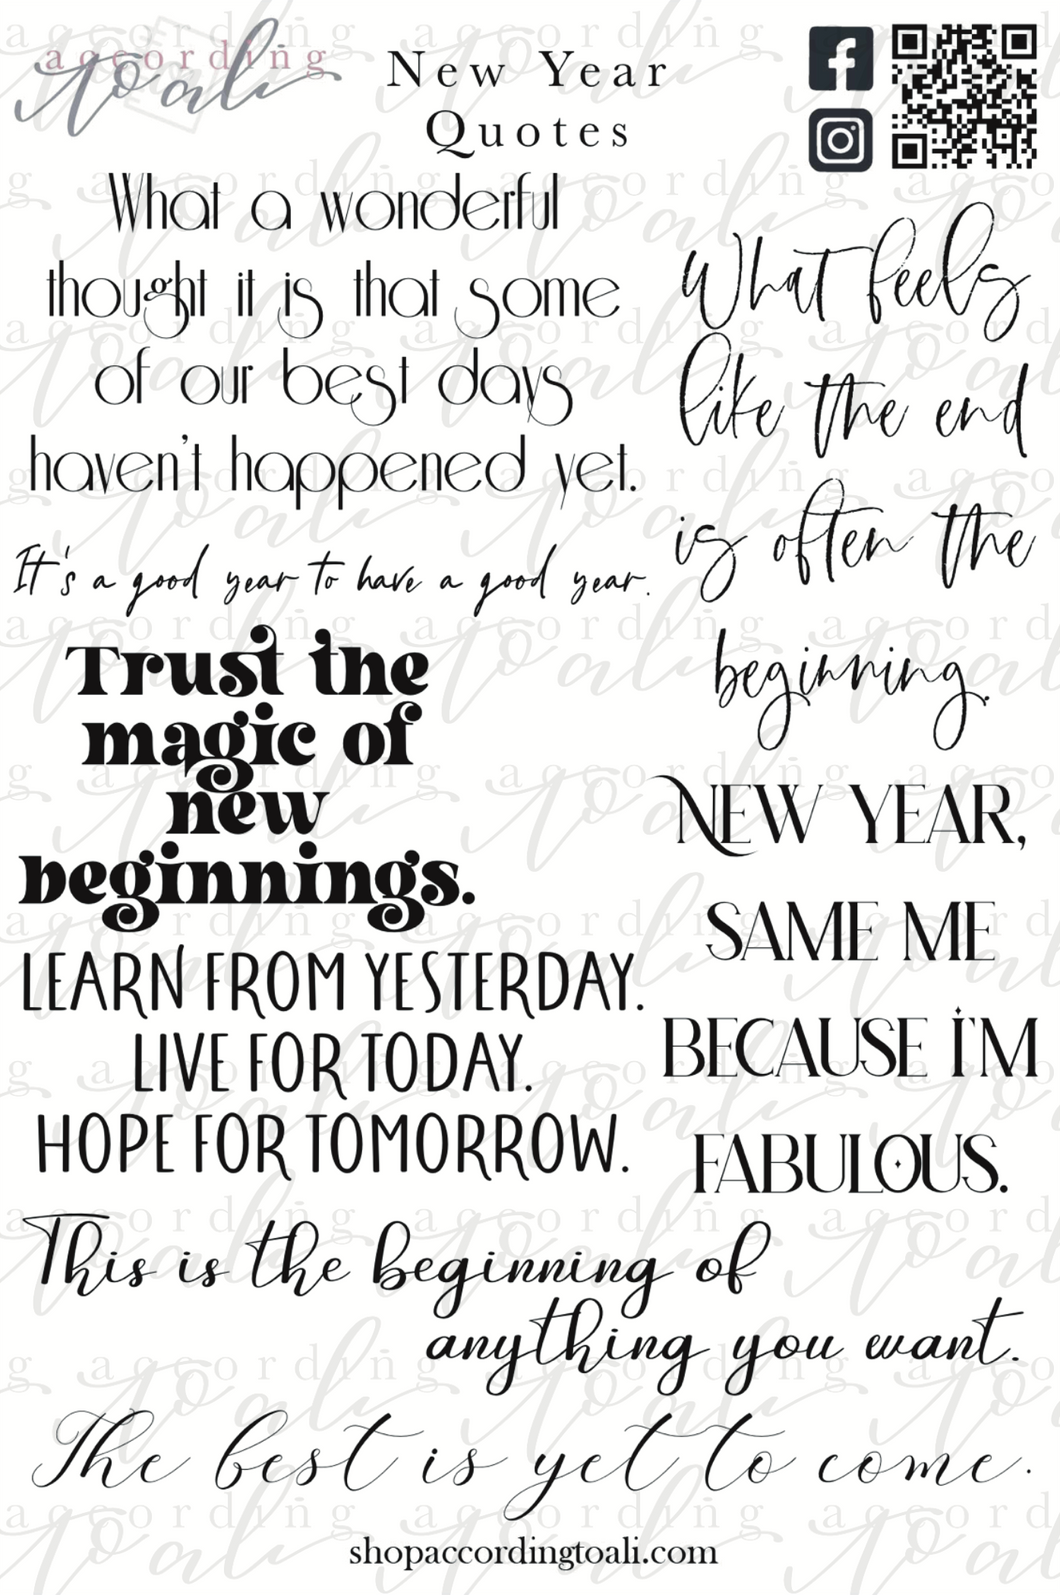 New Year Quotes Sticker Sheet